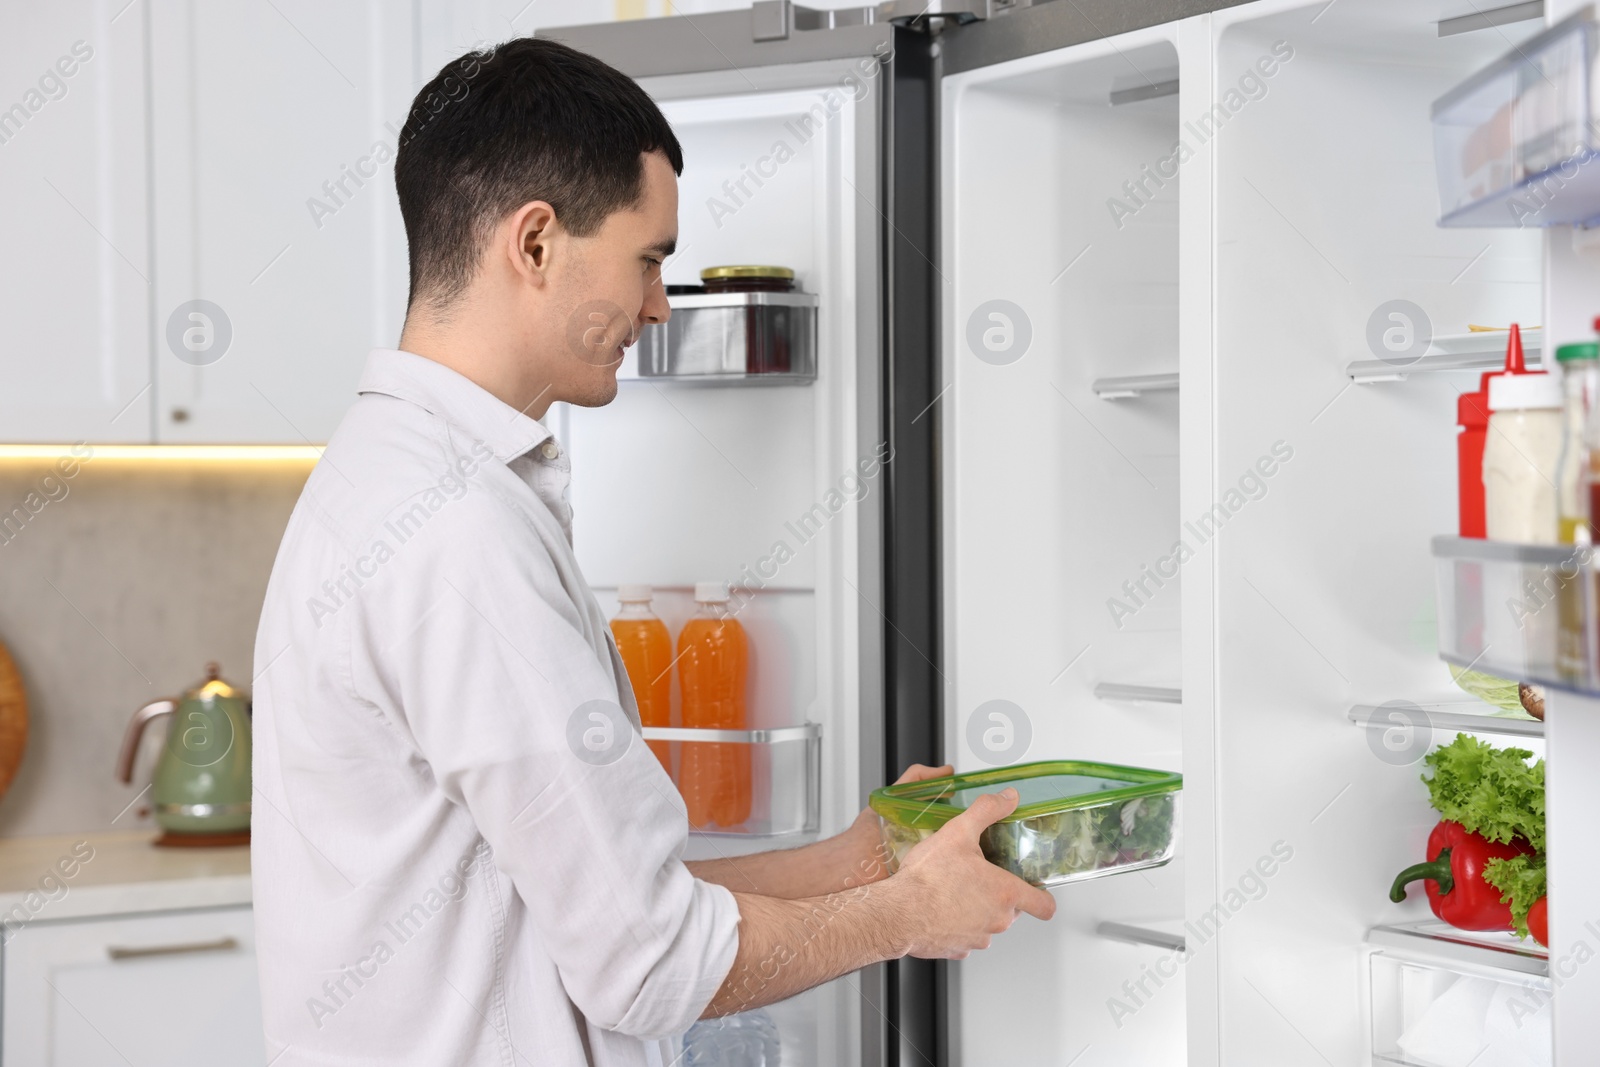 Photo of Man putting container with vegetables into refrigerator in kitchen